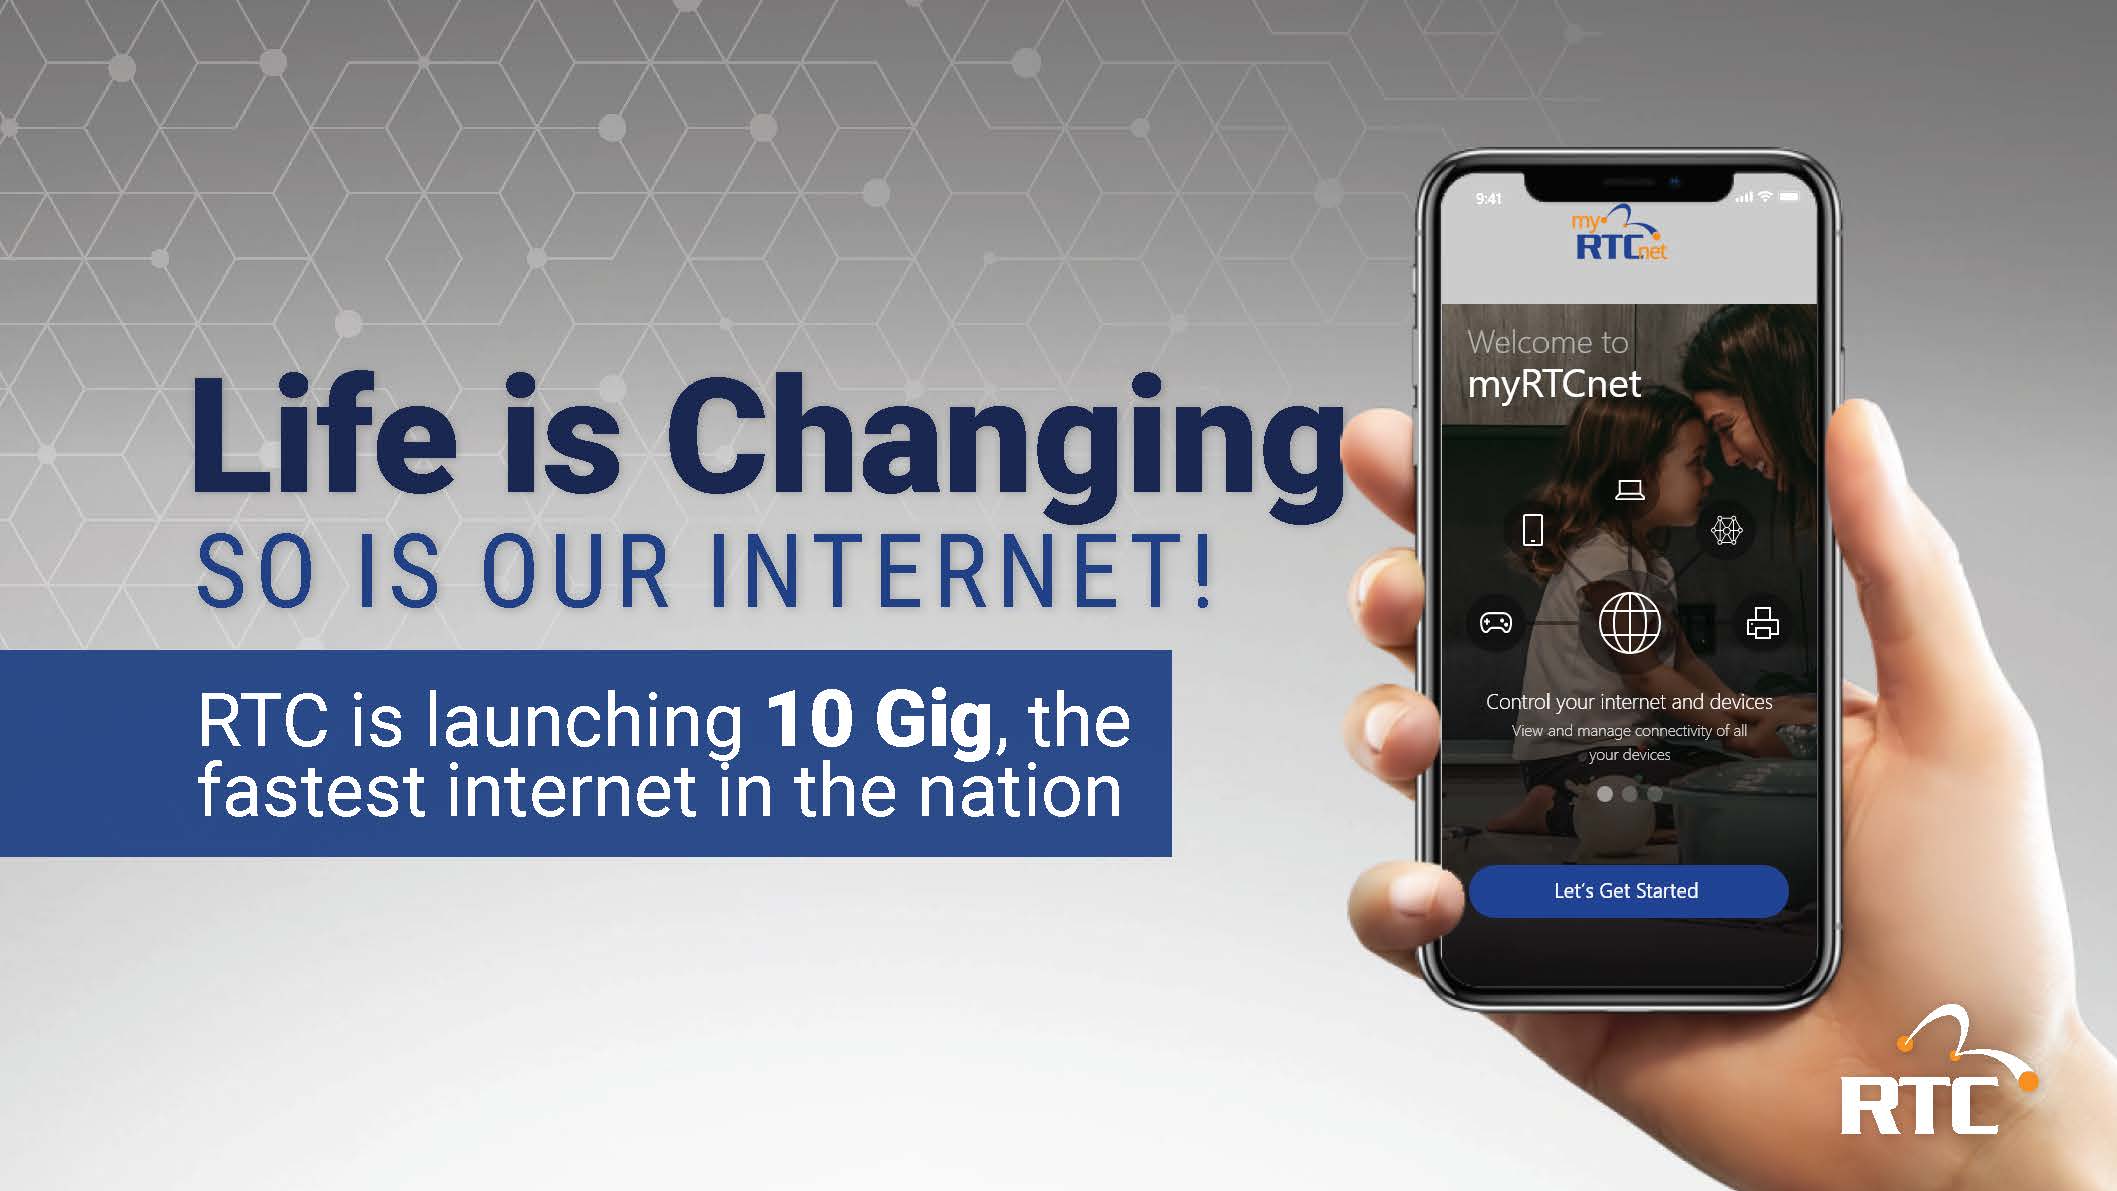 Life is Changing. So is our internet!